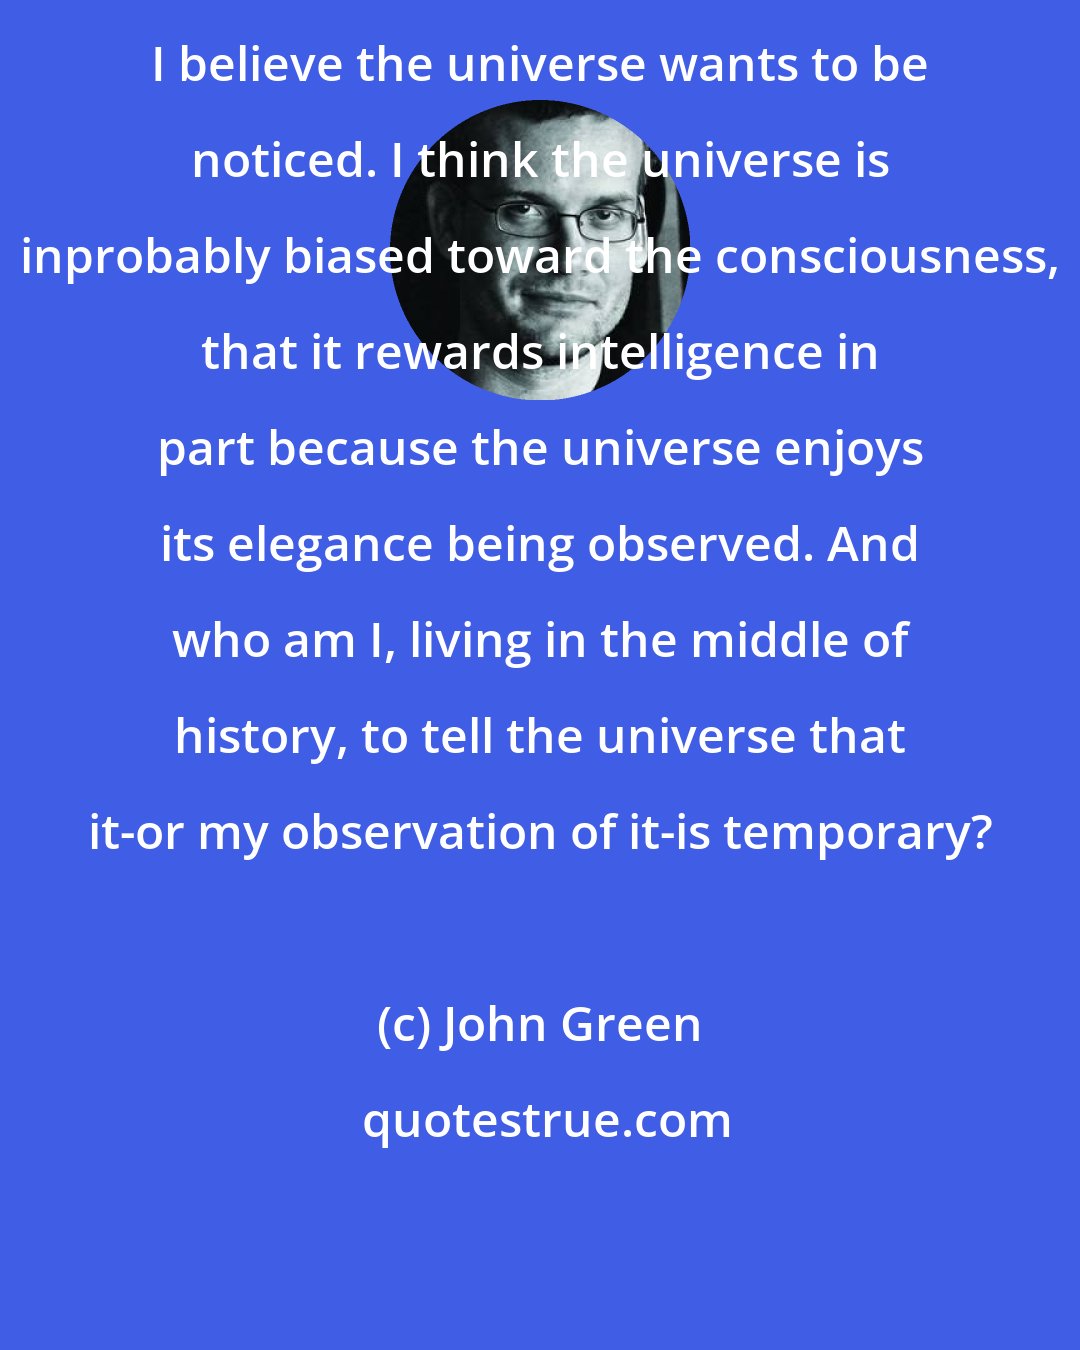 John Green: I believe the universe wants to be noticed. I think the universe is inprobably biased toward the consciousness, that it rewards intelligence in part because the universe enjoys its elegance being observed. And who am I, living in the middle of history, to tell the universe that it-or my observation of it-is temporary?